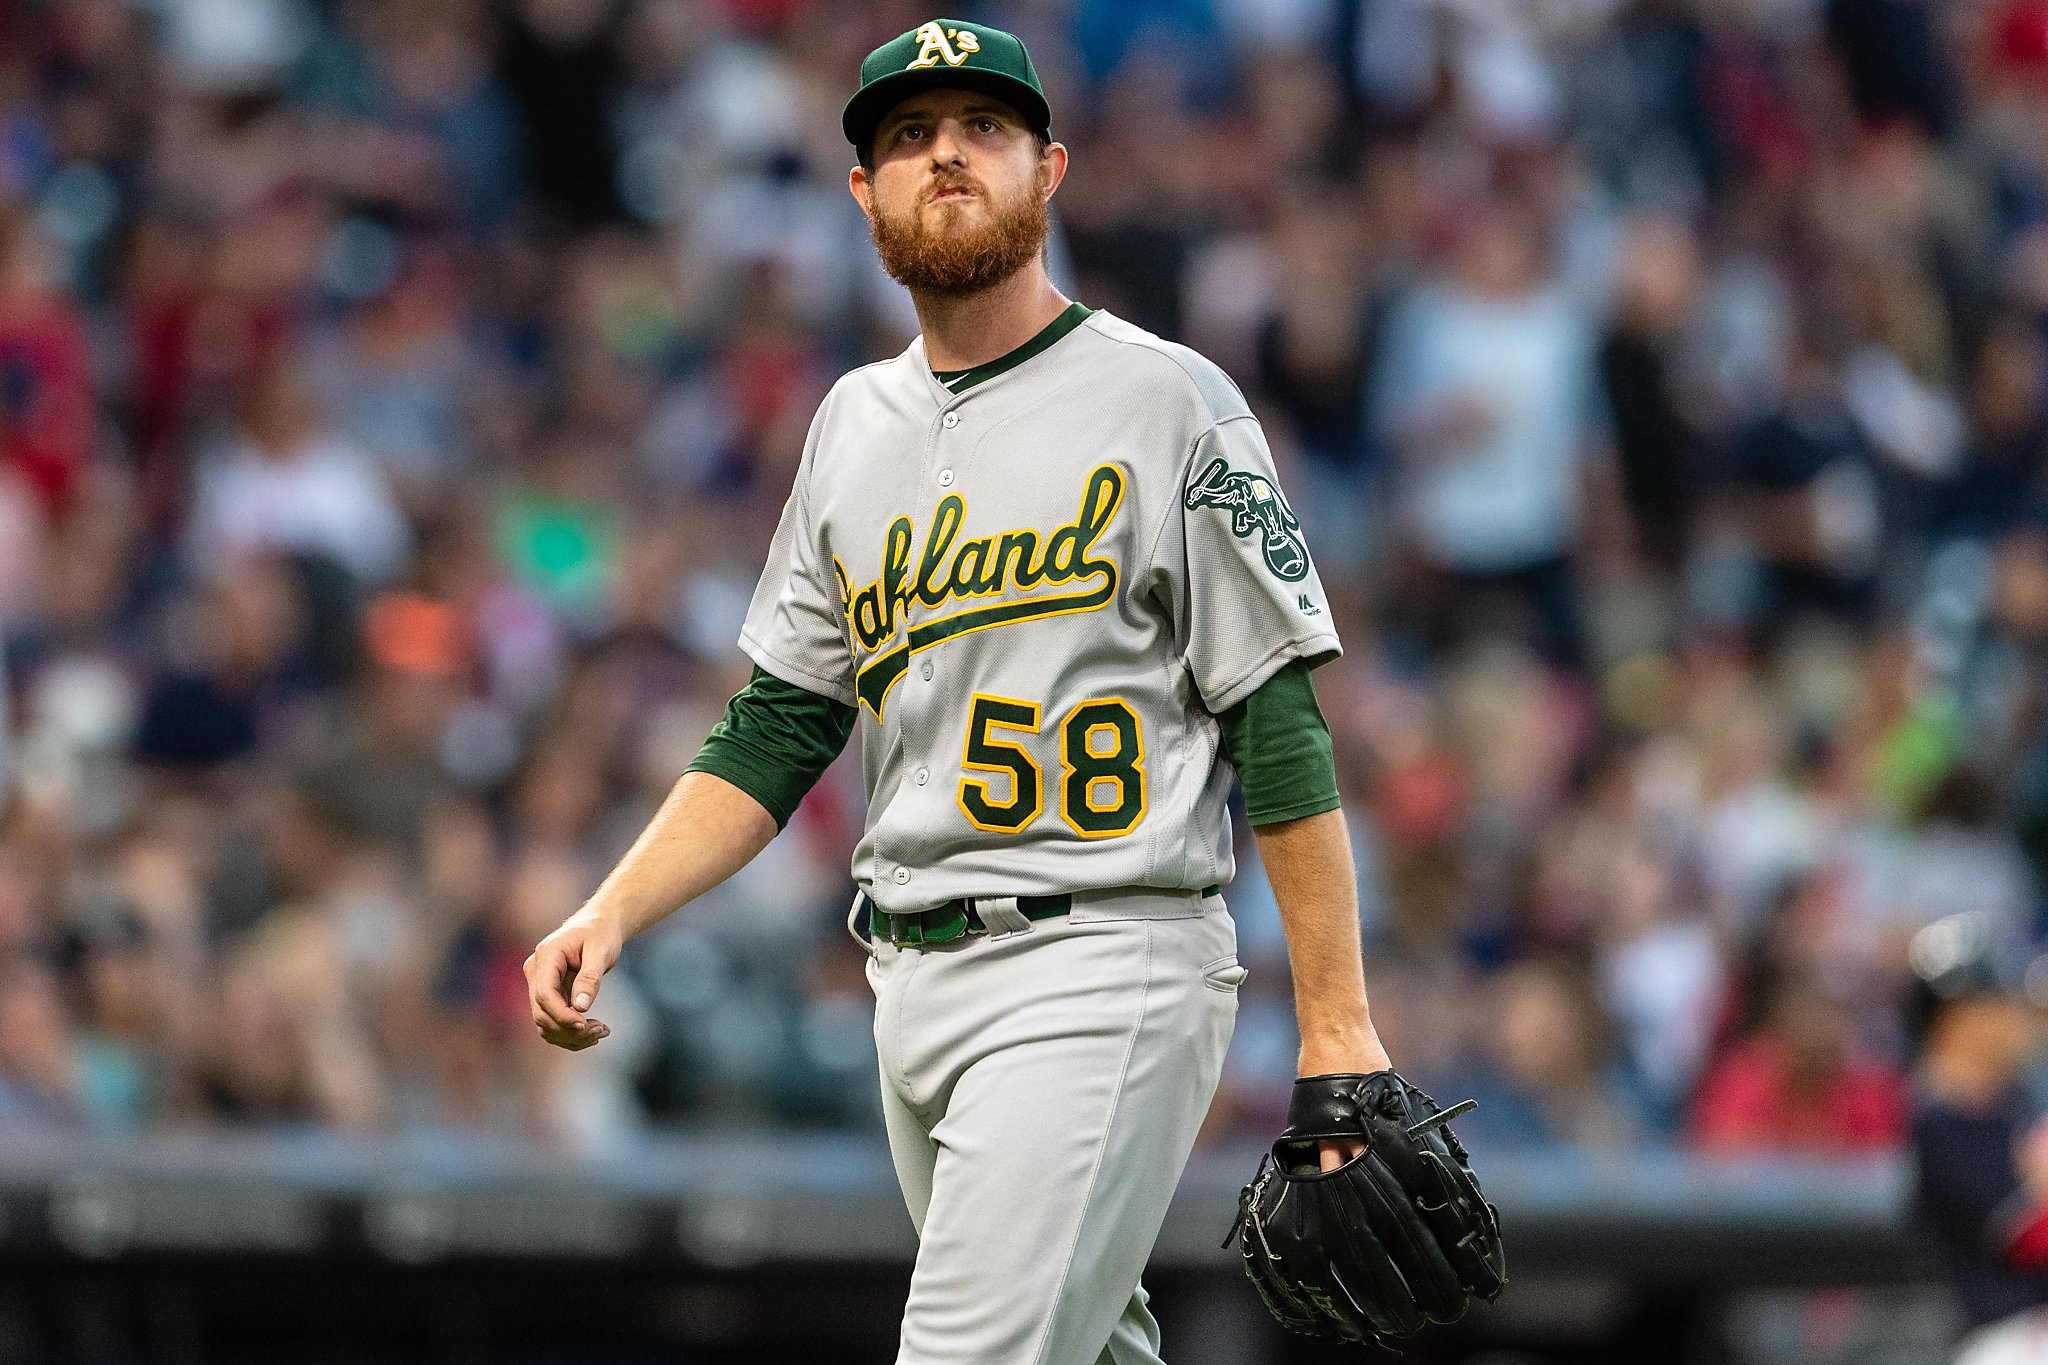 Daniel Mengden's foot surgery a hit for A's rotation depth – East Bay Times